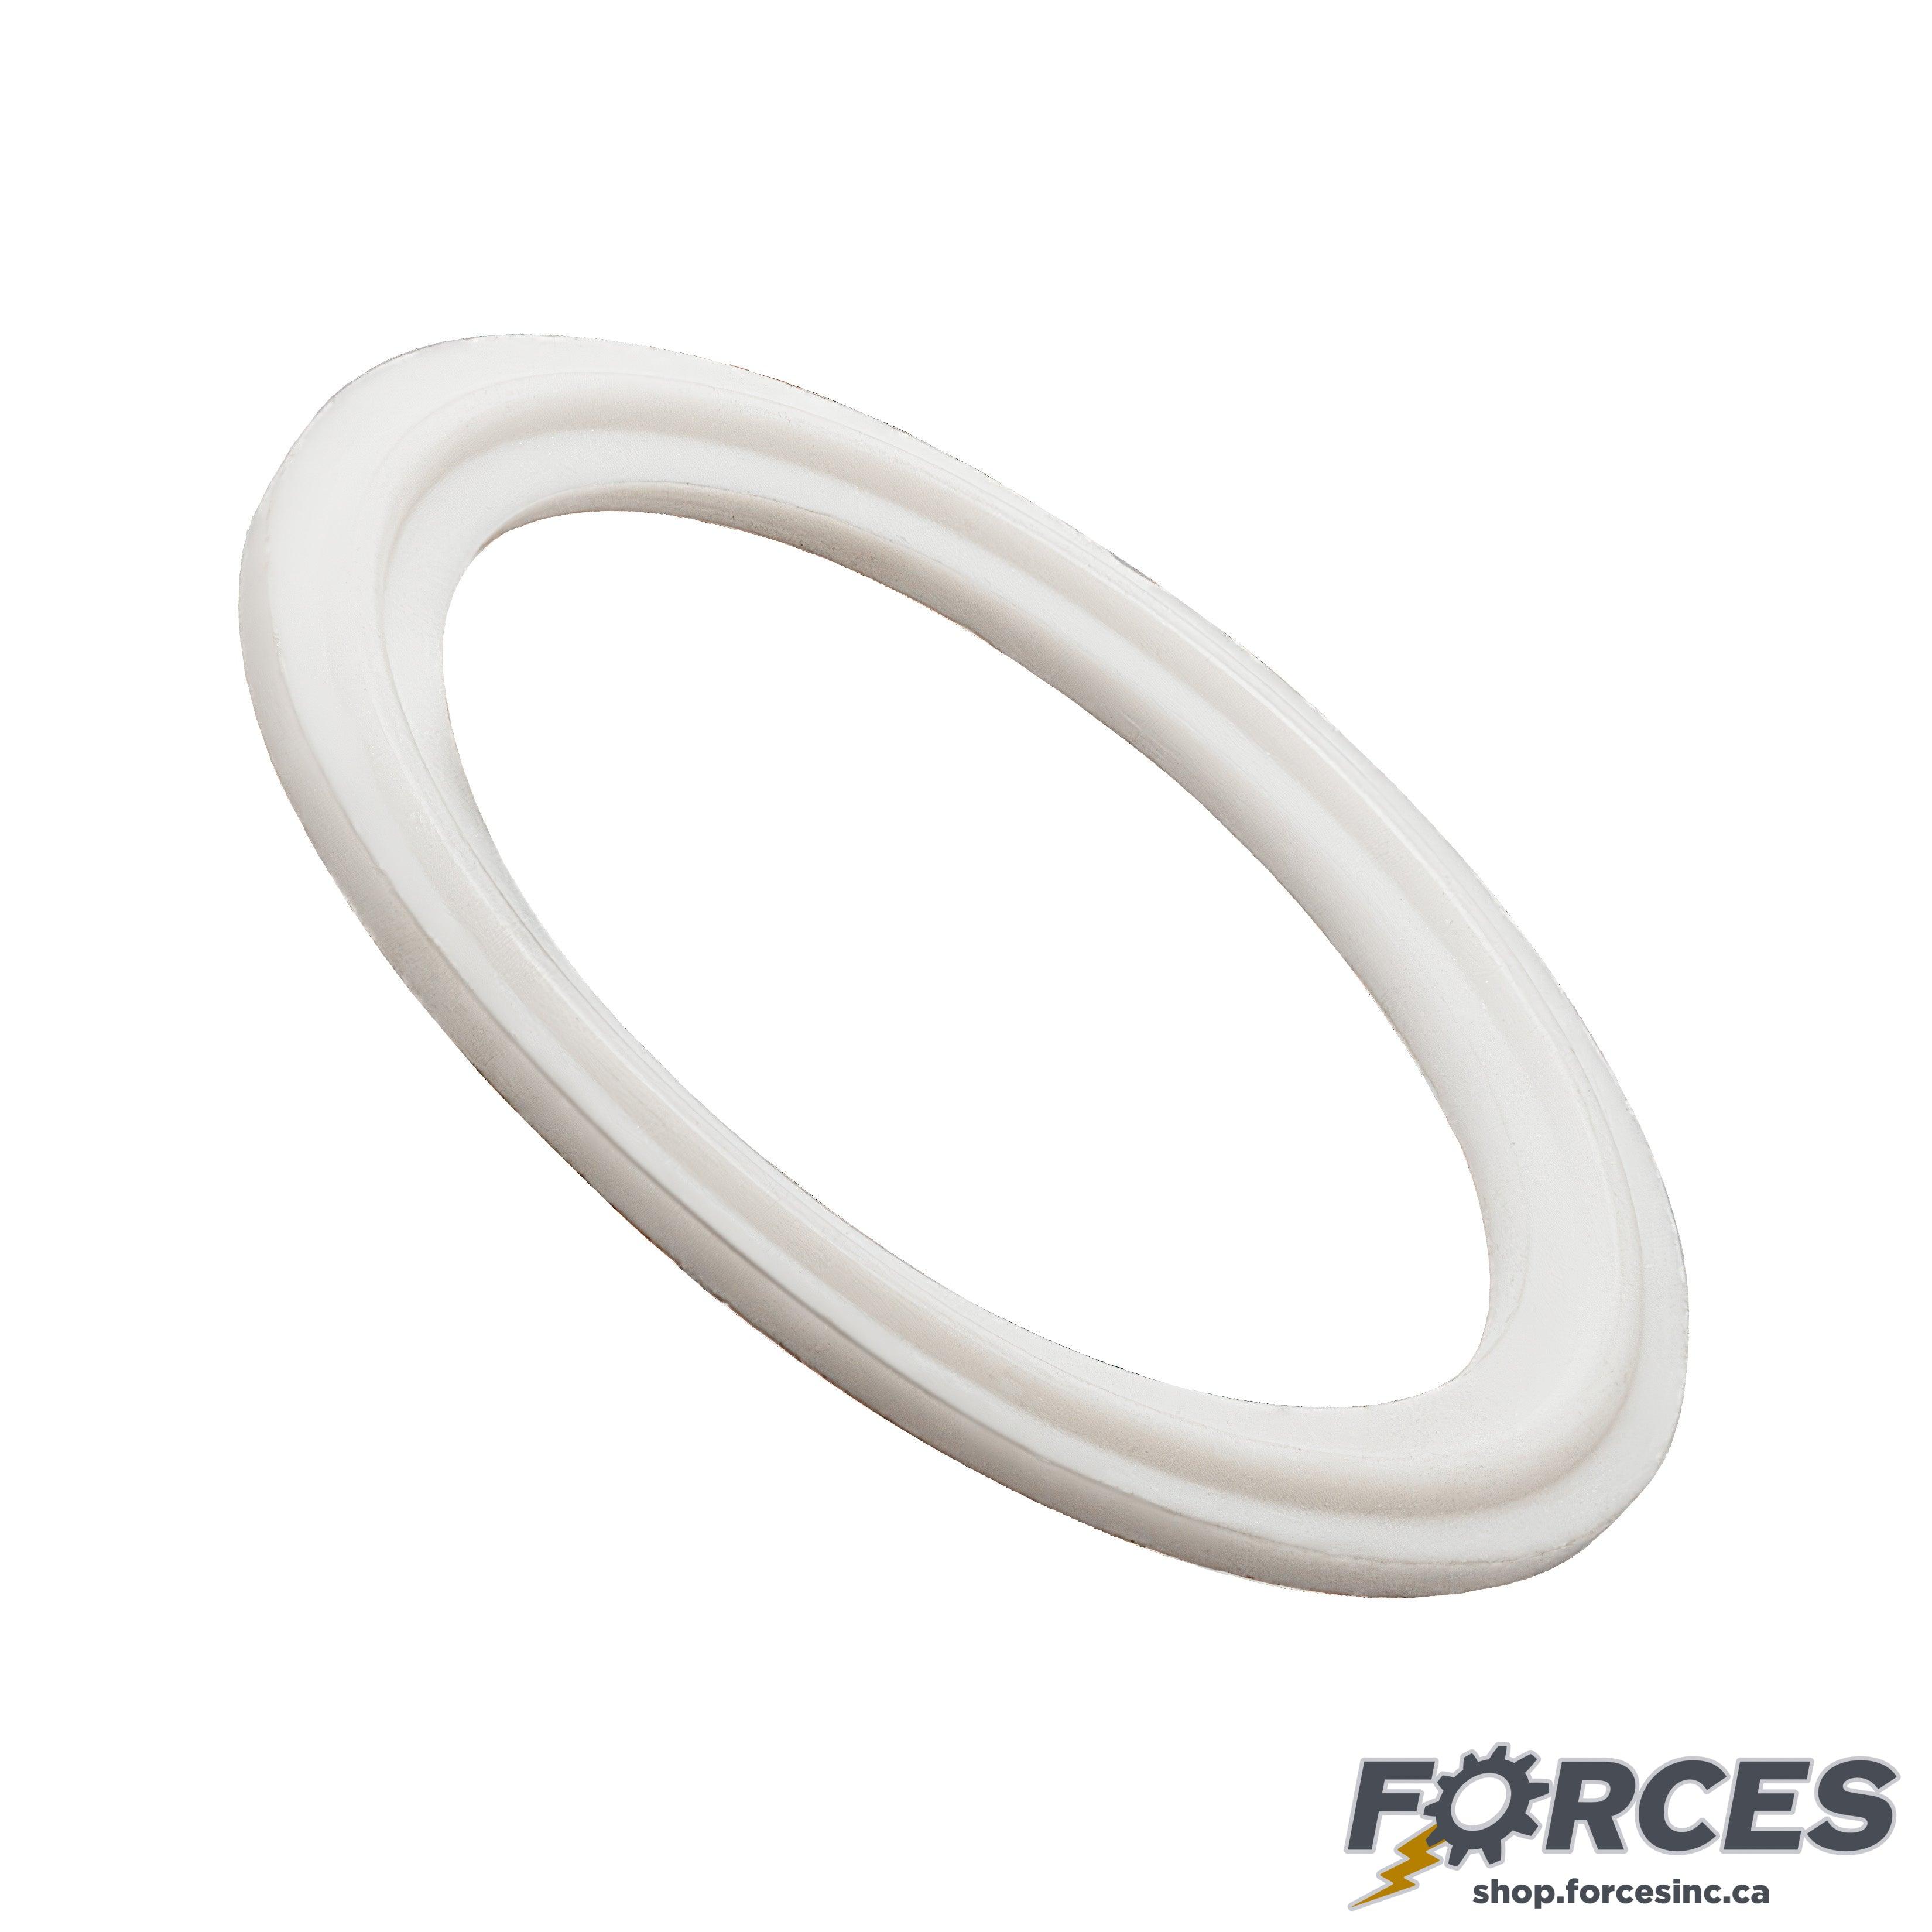 1-1/2" Sanitary Tri-Clamp Gasket - Silicone - Forces Inc